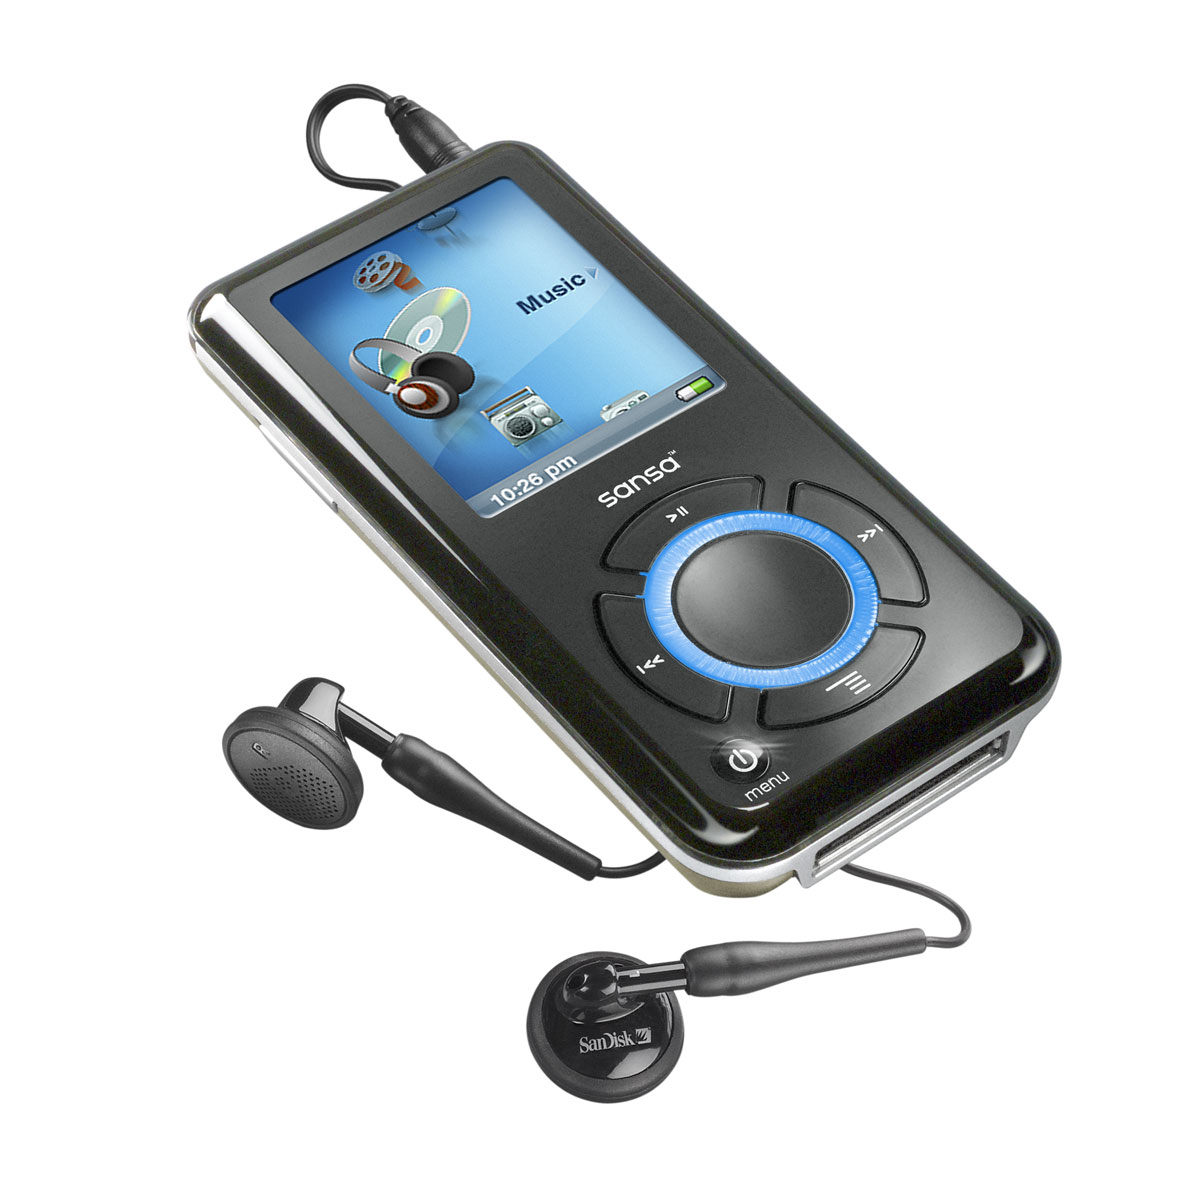  Players Audio on An Mp3 Player These Audio Files Are Compatible With All Mp3 Players